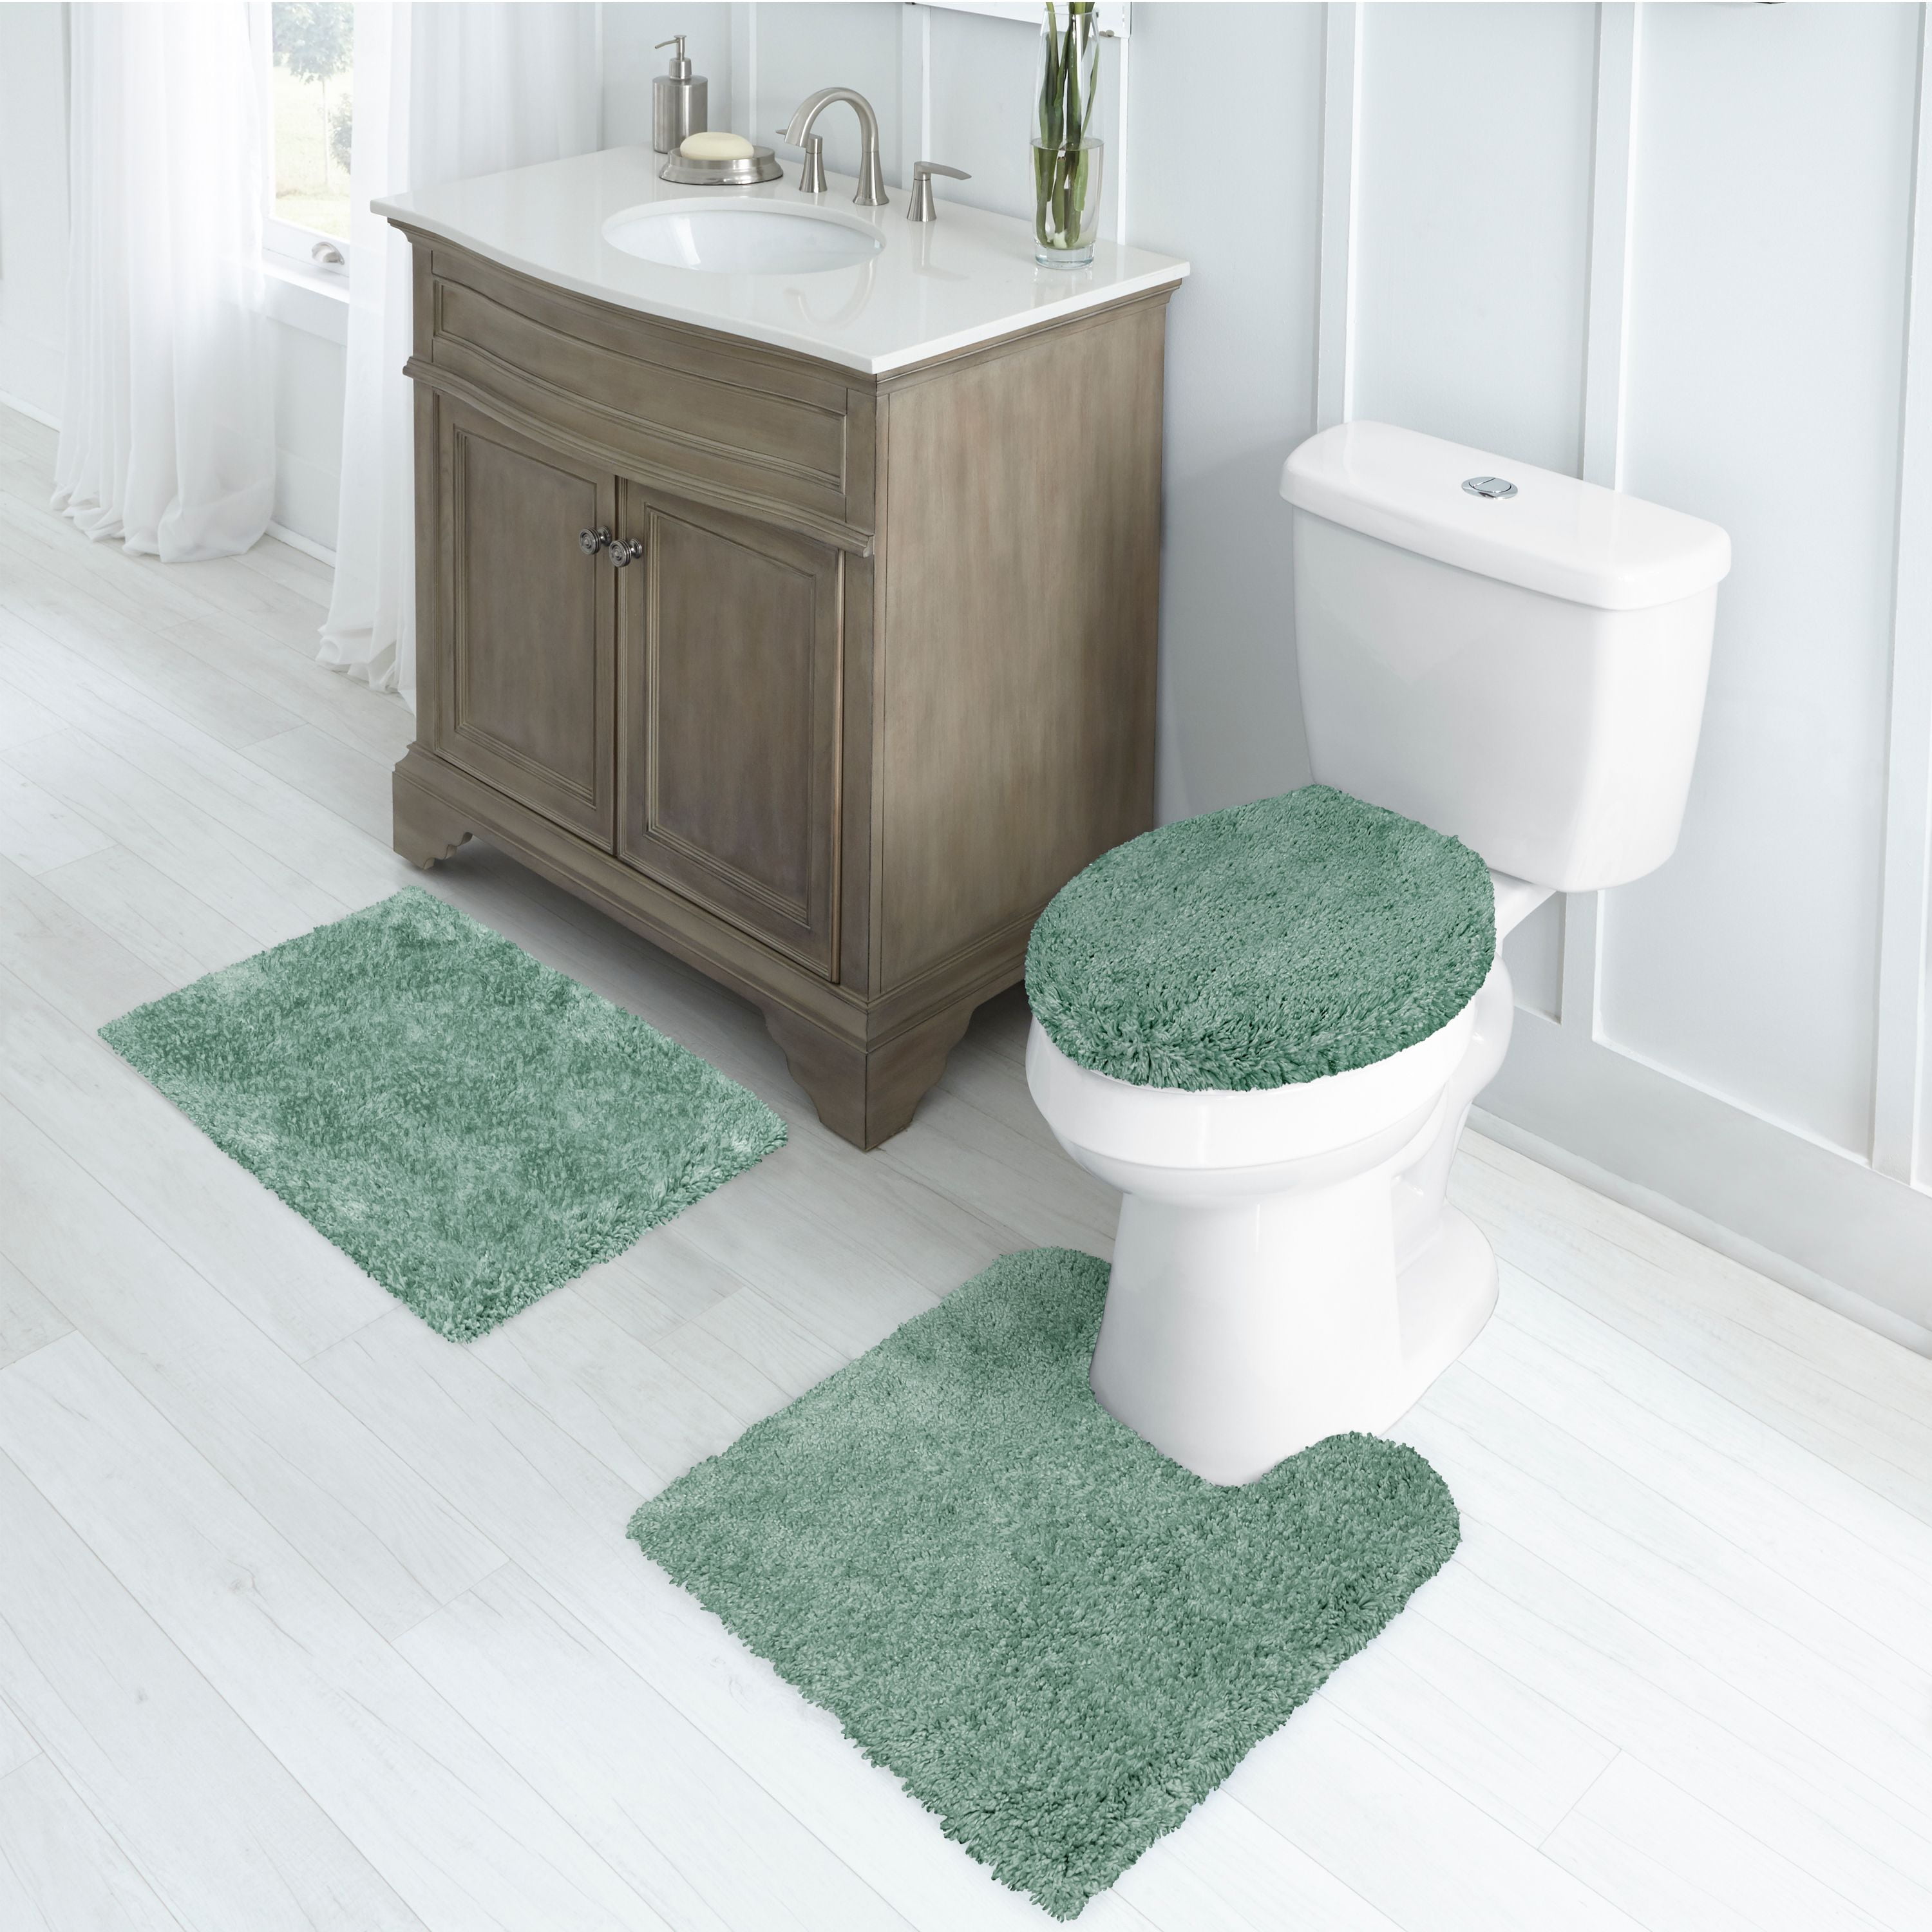 Details about   Better Homes & Gardens Thick & Plush Nylon Bath Rug Skid Resistant 23' x 39" 